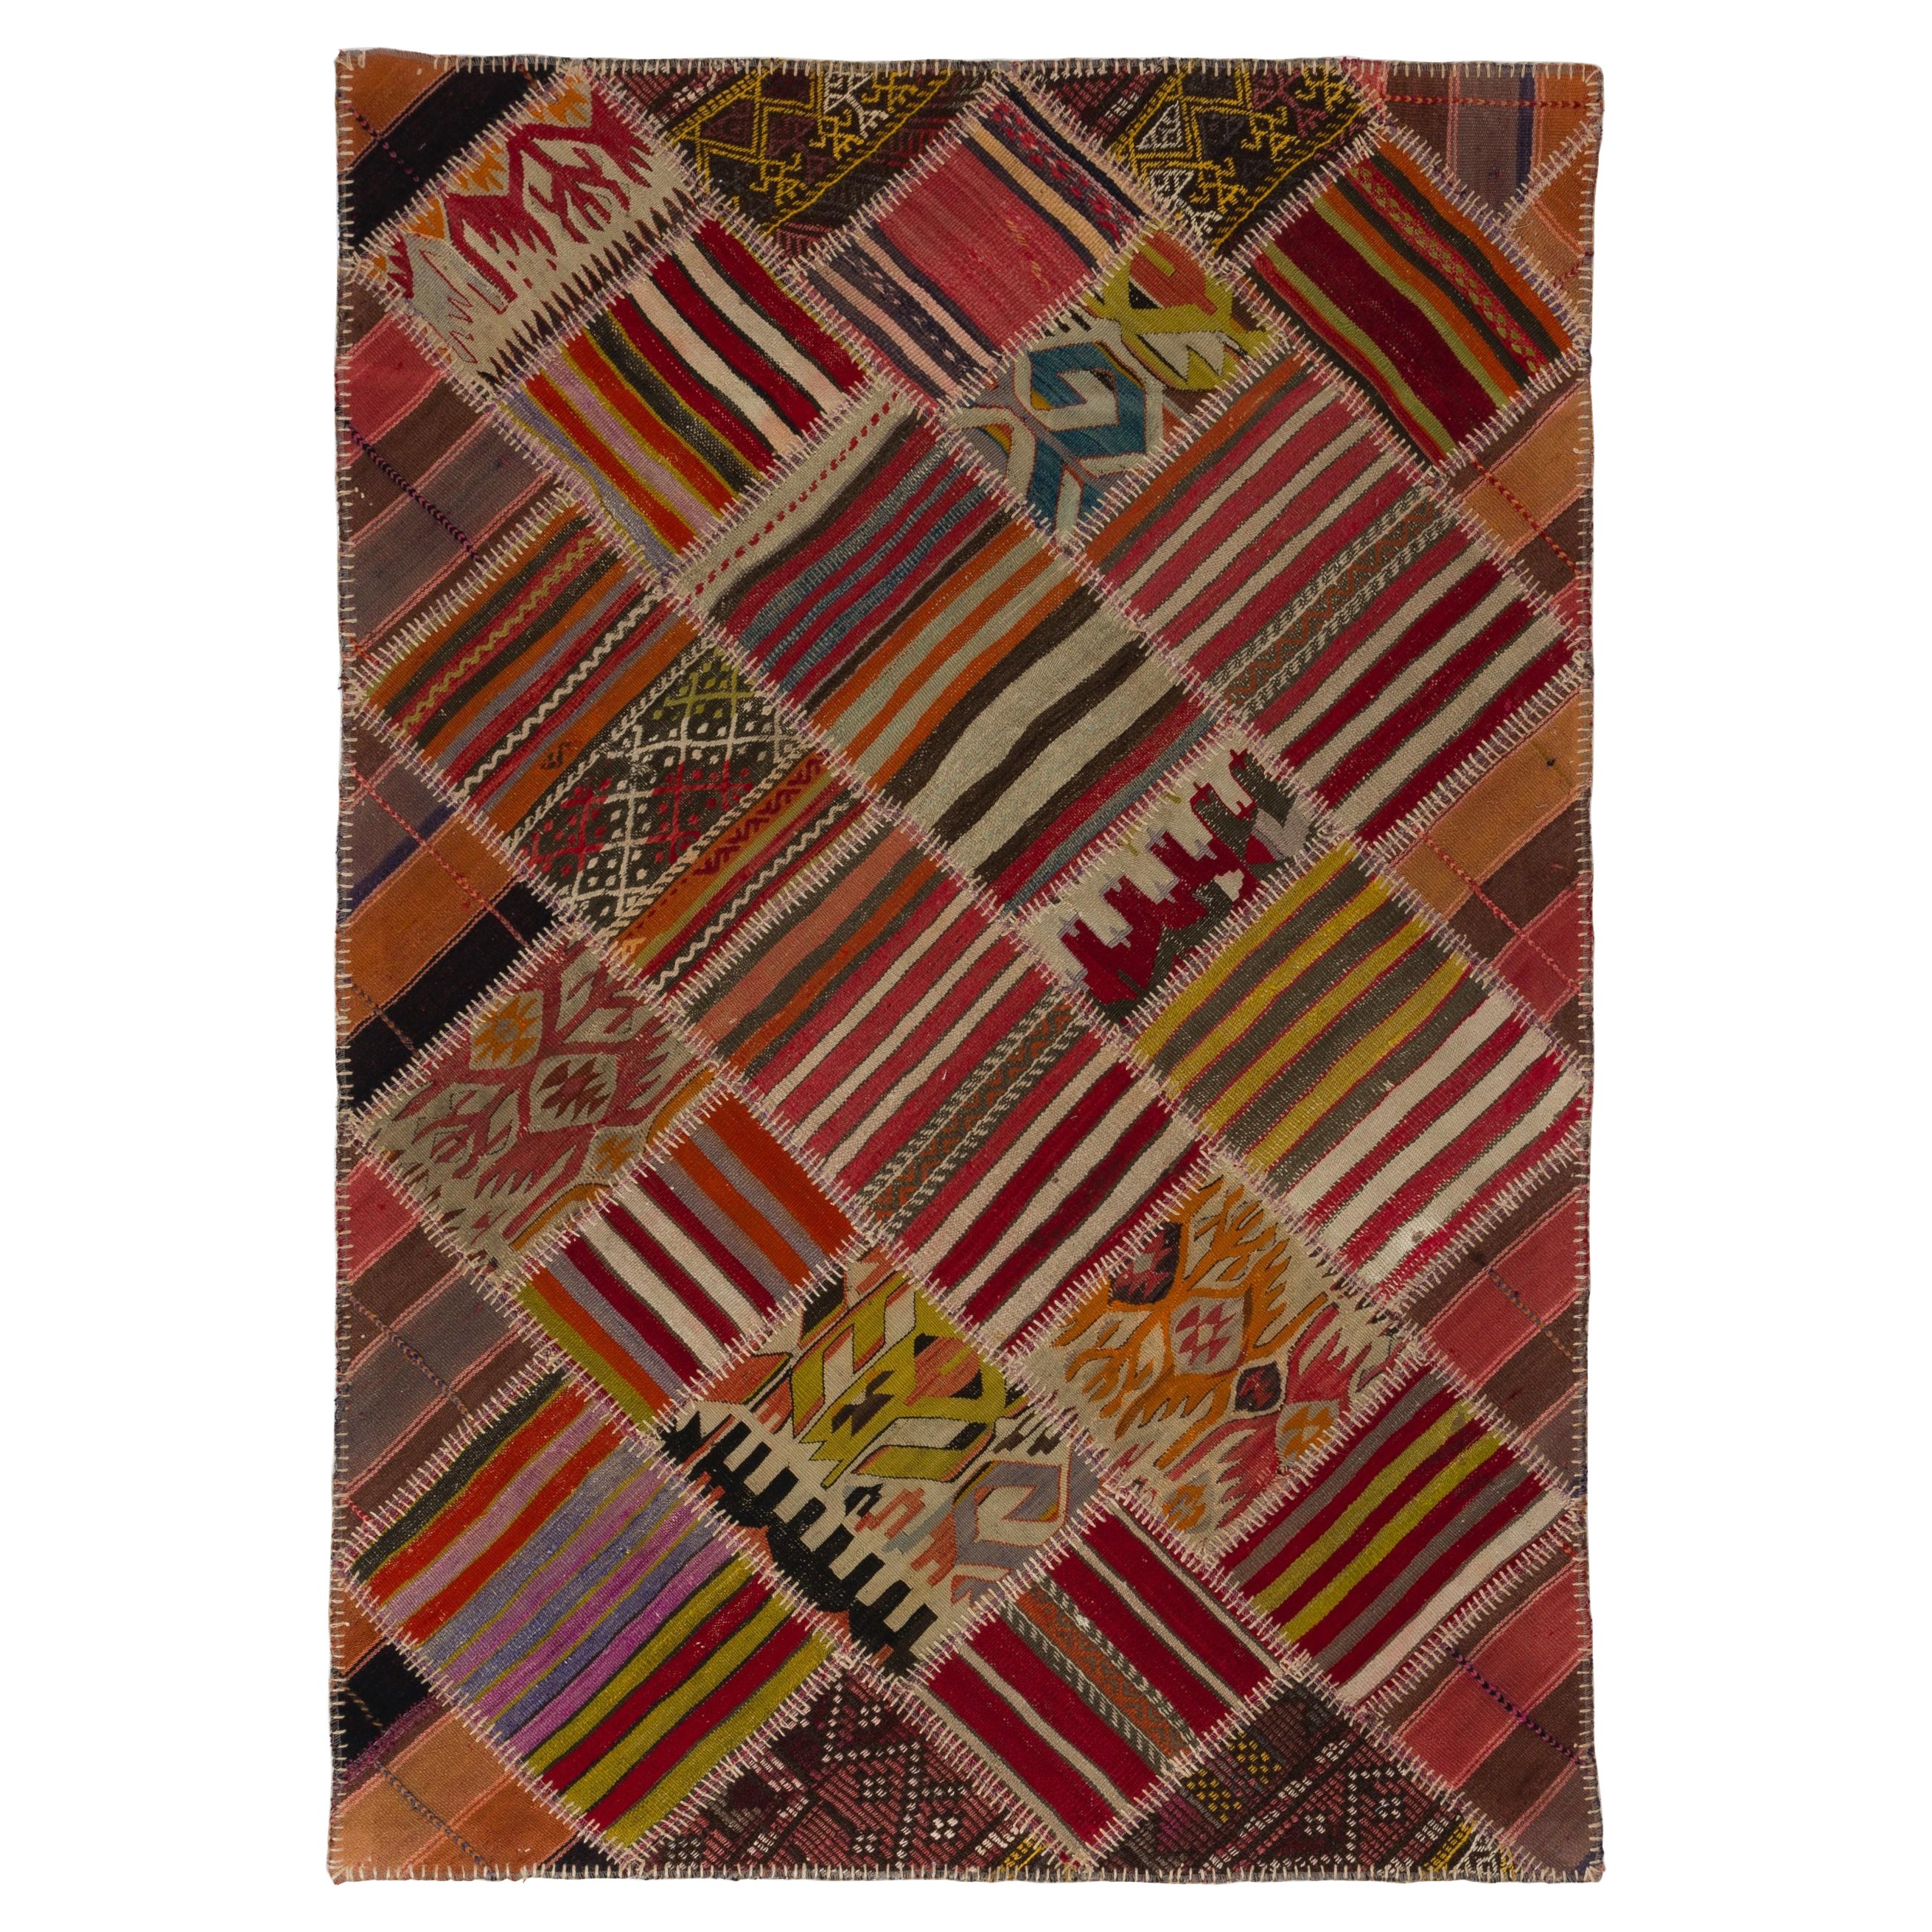 Patchwork Kilim Rug, One of a Kind, Great for Eclectic, Bohemian Interiors